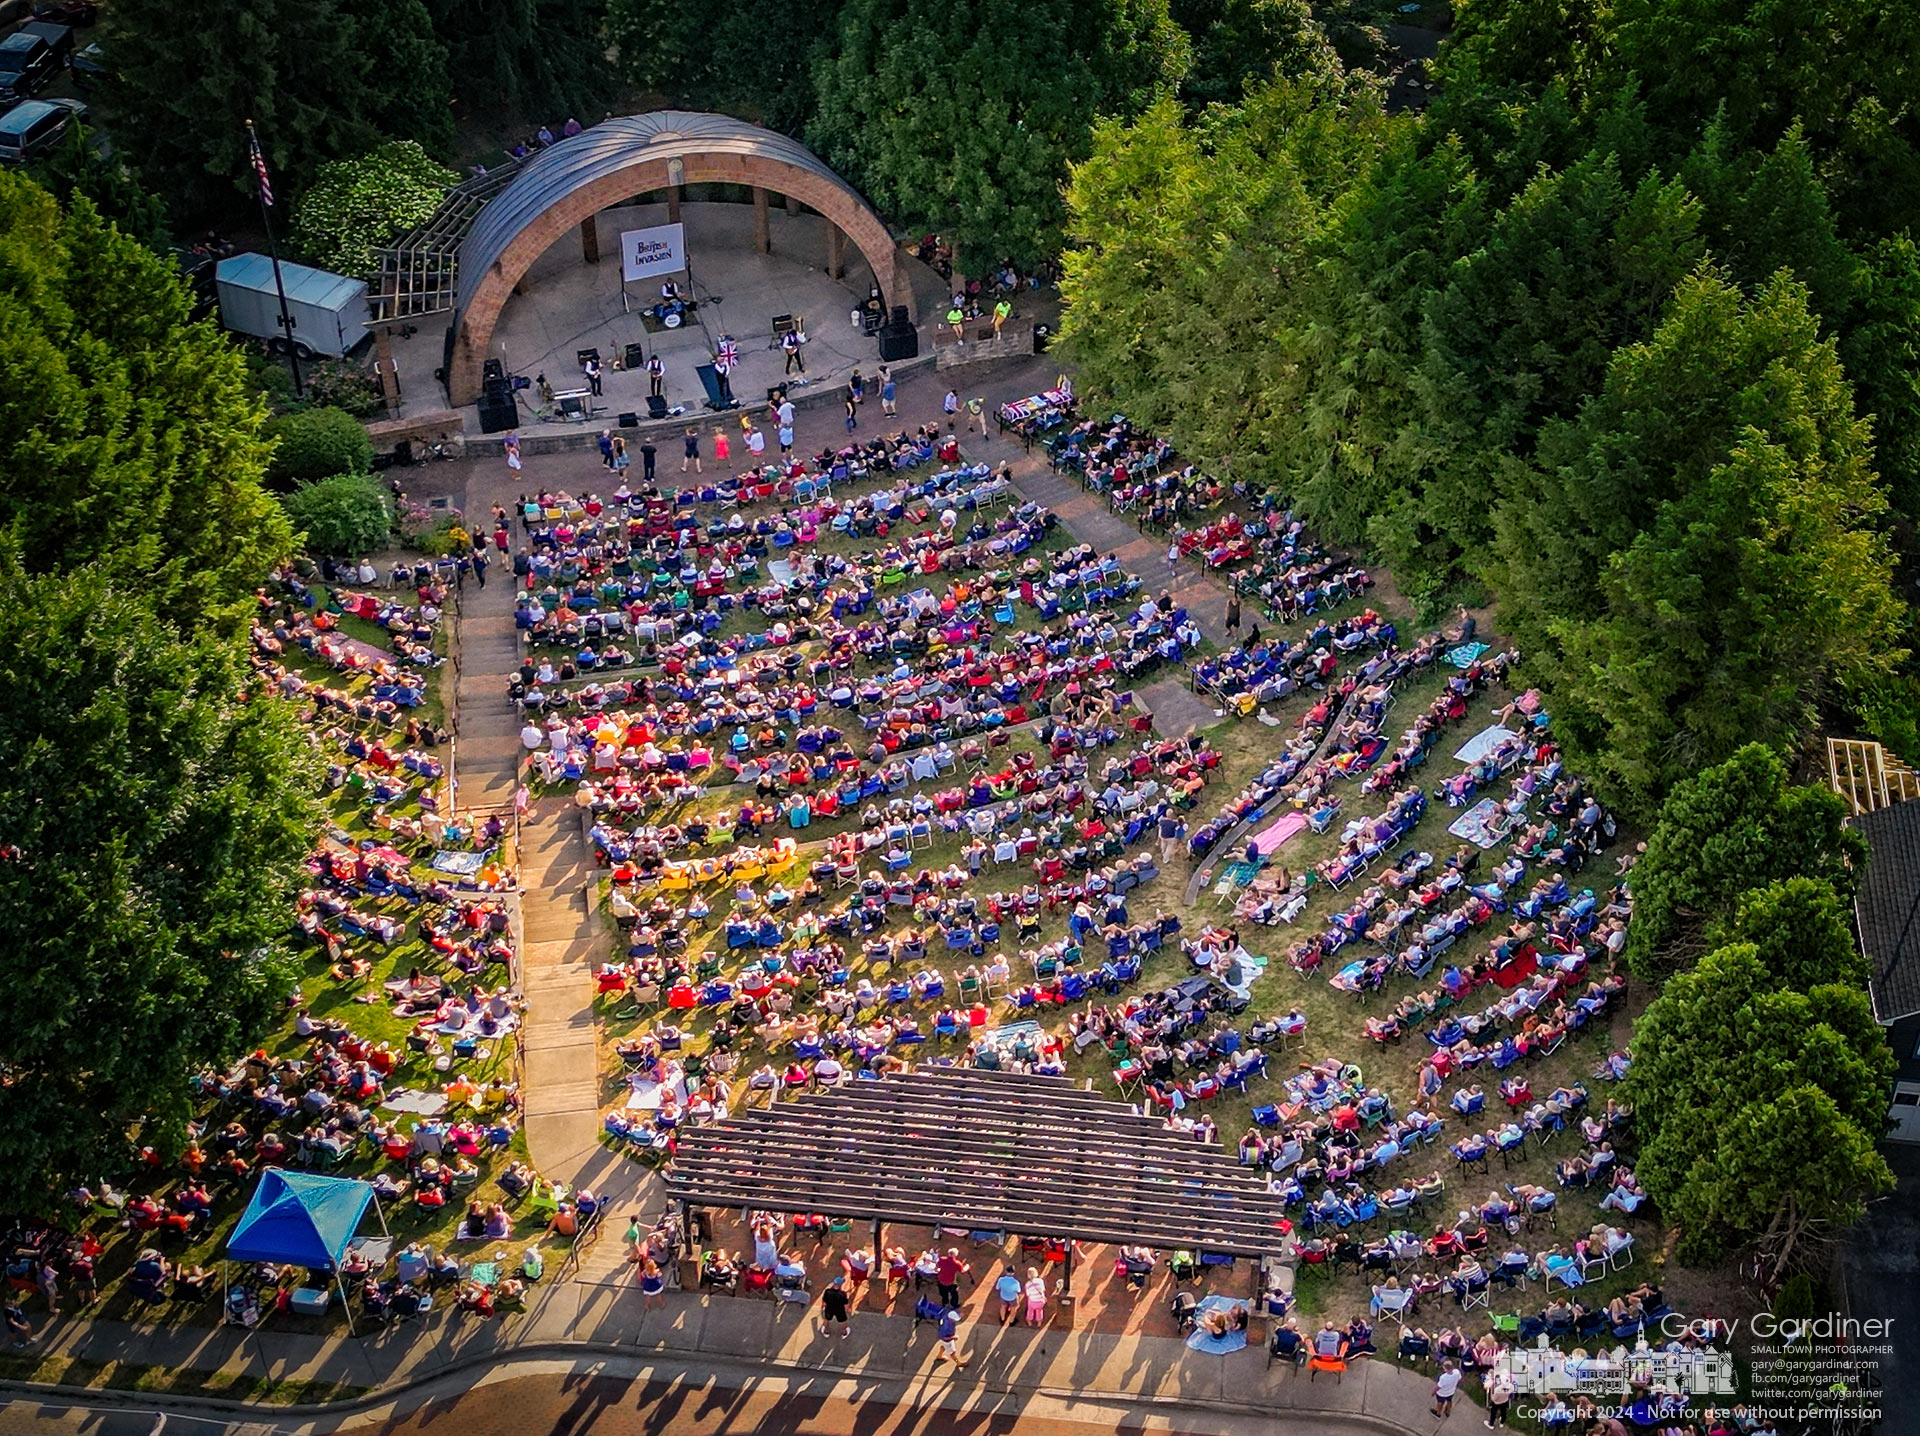 An overflow crowd gathers at the Alum Creek Amphitheater to hear the British Invasion band's annual Summer Concert in the park. My Final Photo for July 21, 2024.